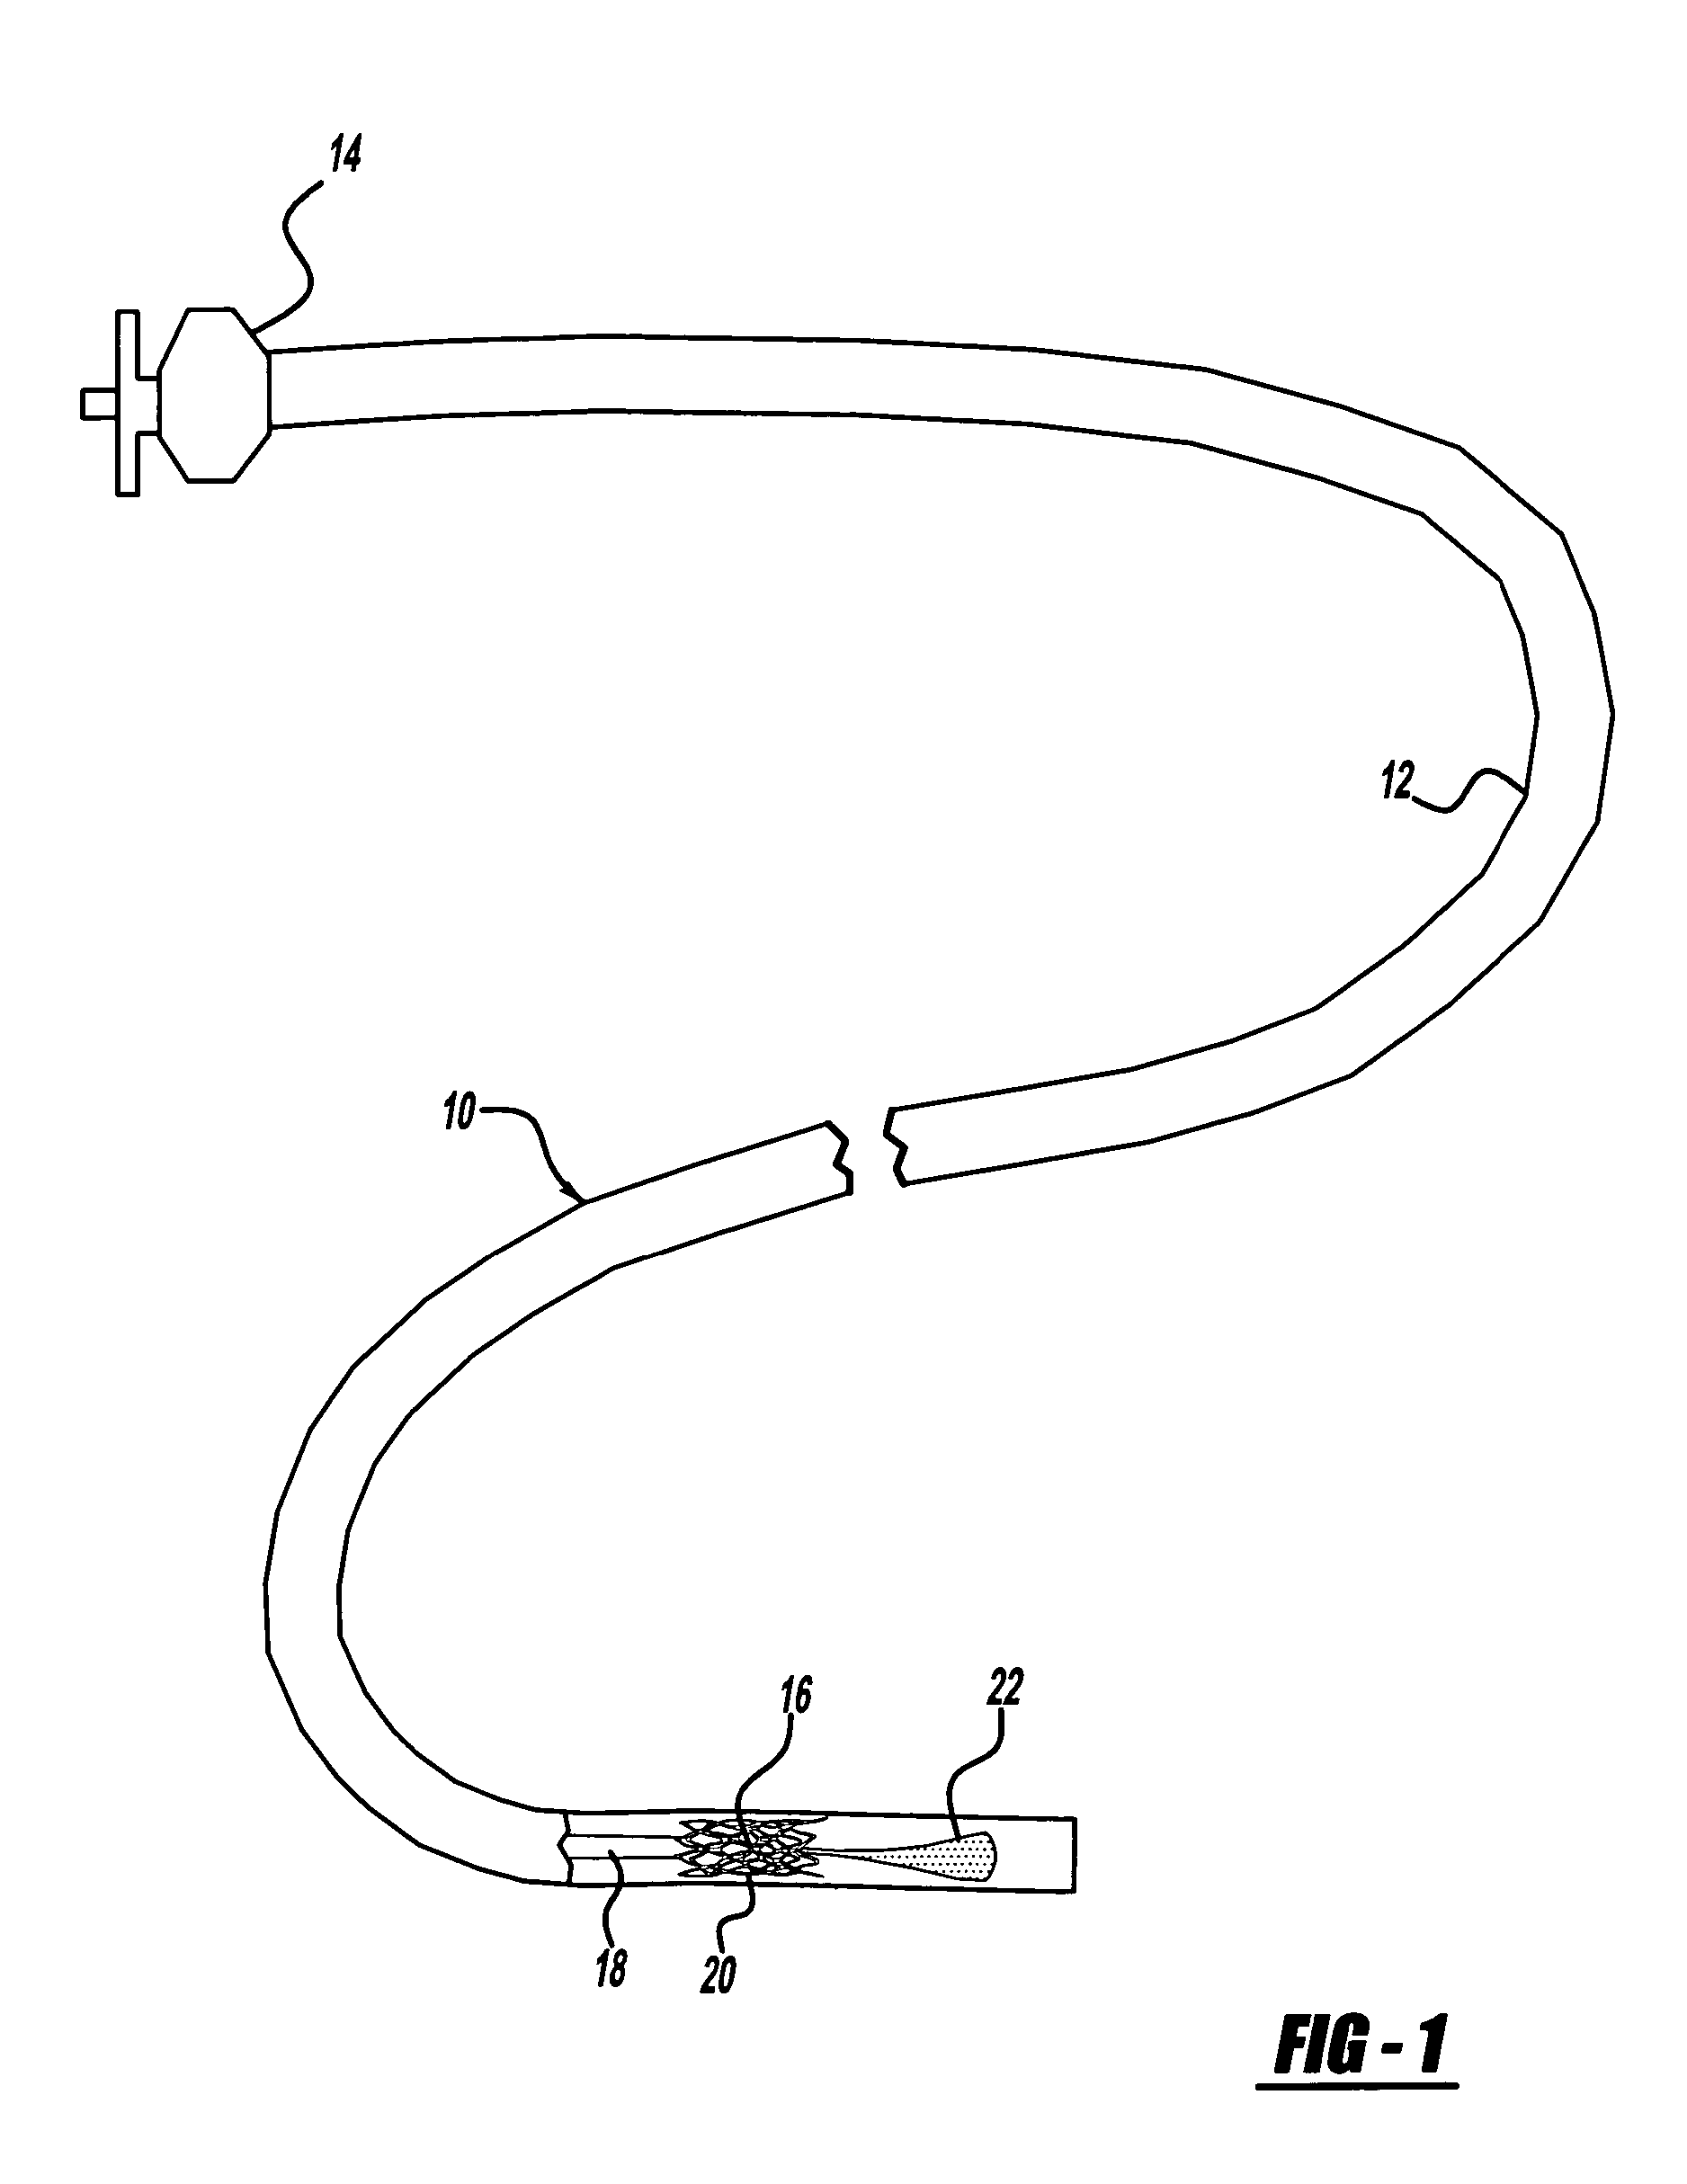 Neck covering device for an aneurysm